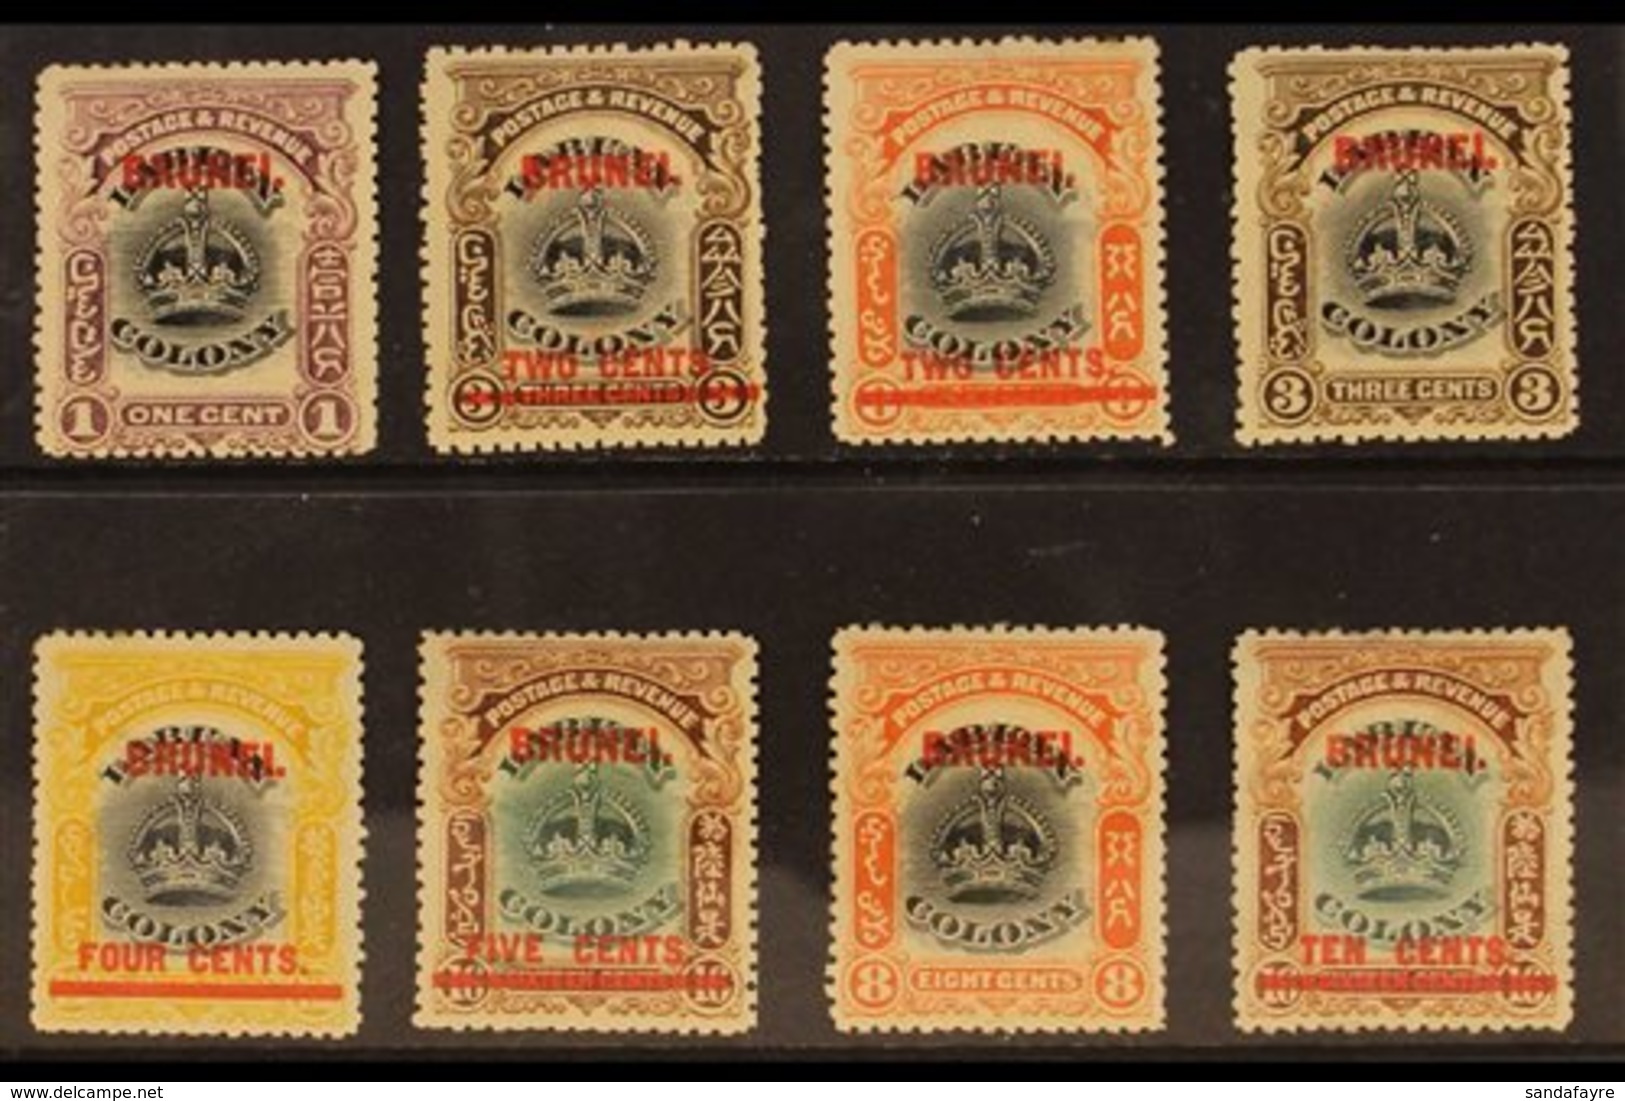 1906 Overprints On Labuan Set Complete From 1c To 10c On 16c, SG 11/18, Mint, Mostly Fine. (8 Stamps) For More Images, P - Brunei (...-1984)